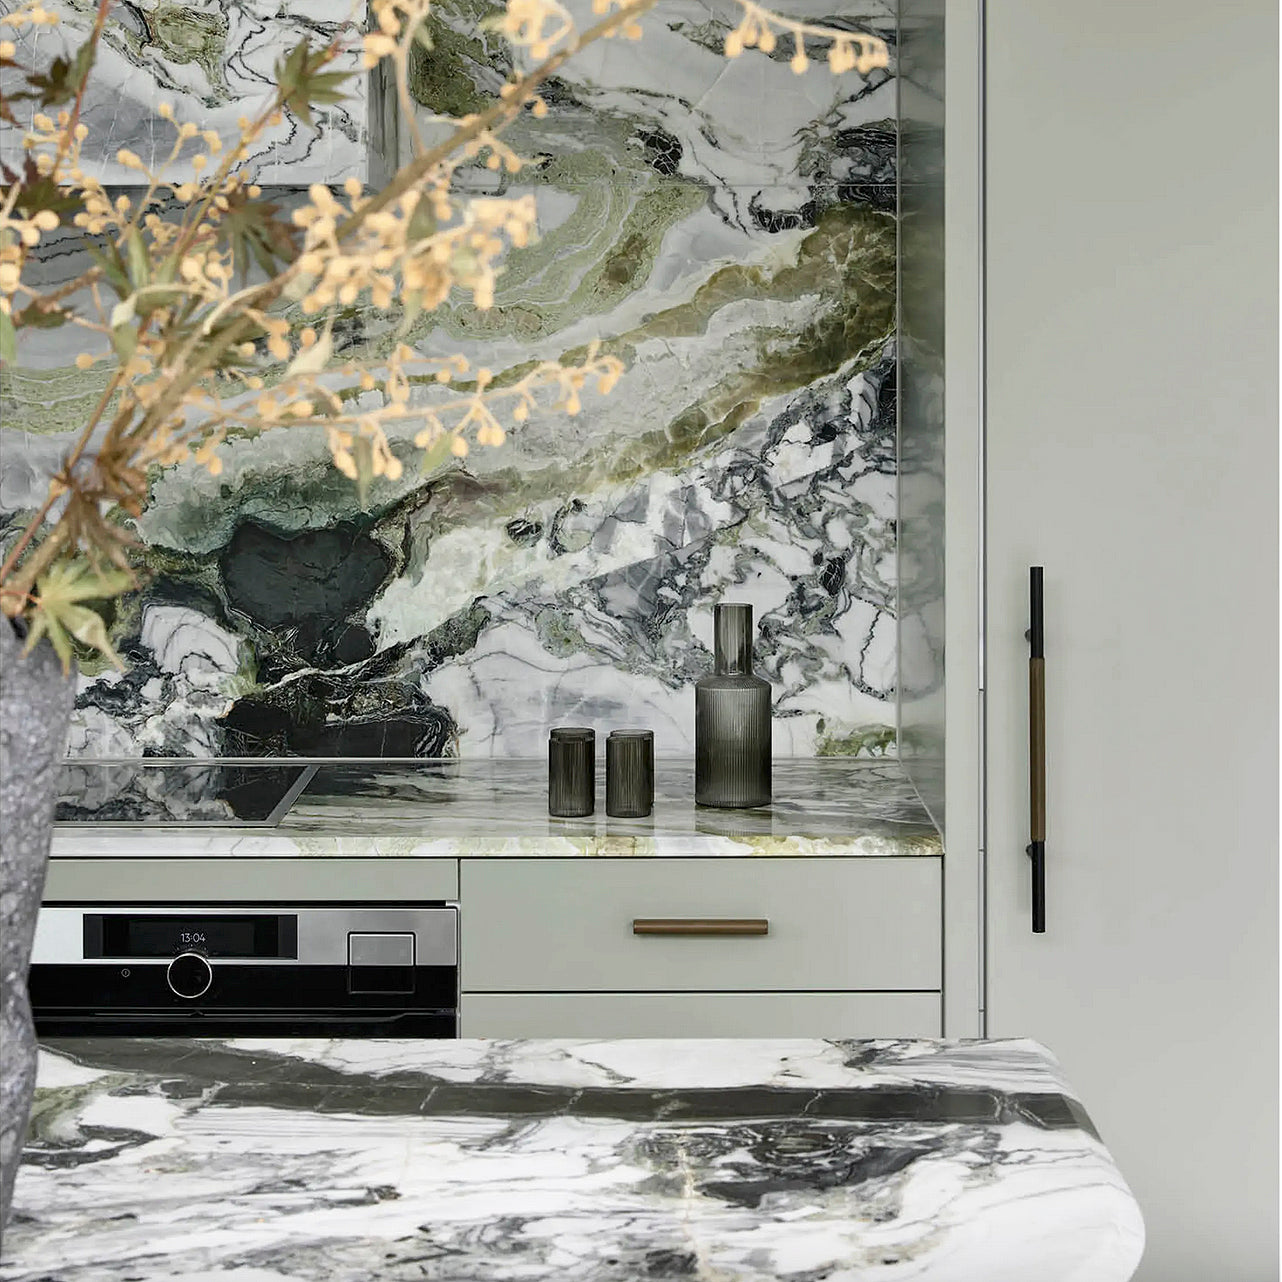 Safari Journal / Blog by Safari Fusion | Pros & Cons of Marble Benchtops by Shear & Wood | Melbourne Suburban Home by Luke Fry | Image via The Design Files